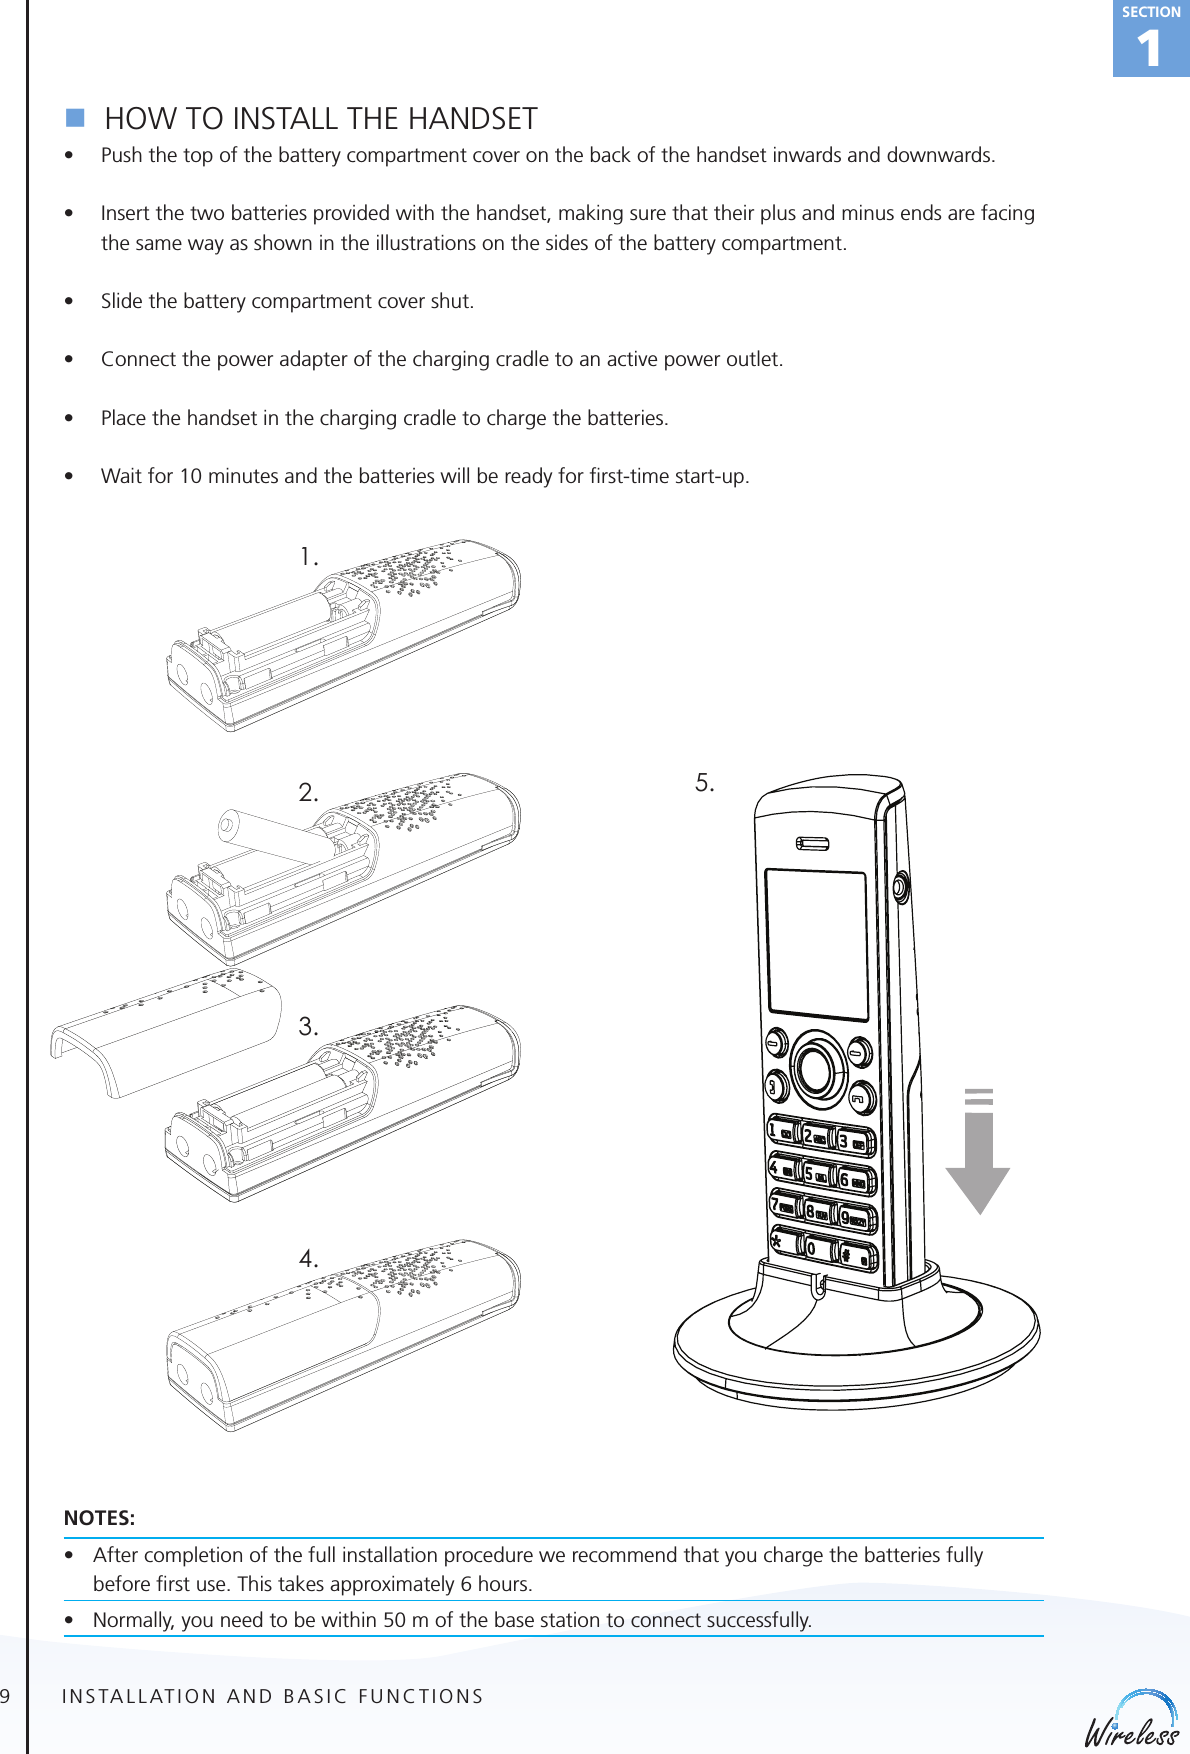 9english1Sectionn  HOW TO INSTALL THE HANDSET• Push the top of the battery compartment cover on the back of the handset inwards and downwards.• Insert the two batteries provided with the handset, making sure that their plus and minus ends are facing the same way as shown in the illustrations on the sides of the battery compartment.• Slide the battery compartment cover shut.• Connect the power adapter of the charging cradle to an active power outlet.• Place the handset in the charging cradle to charge the batteries.• Wait for 10 minutes and the batteries will be ready for ﬁrst-time start-up. NOTES:• Aftercompletionofthefullinstallationprocedurewerecommendthatyouchargethebatteriesfullybefor e ﬁrst use. This takes approximately 6 hours.    • Normally,youneedtobewithin50mofthebasestationtoconnectsuccessfully.INSTALLATION AND BASIC FUNCTIONS1.2.3.4.5.